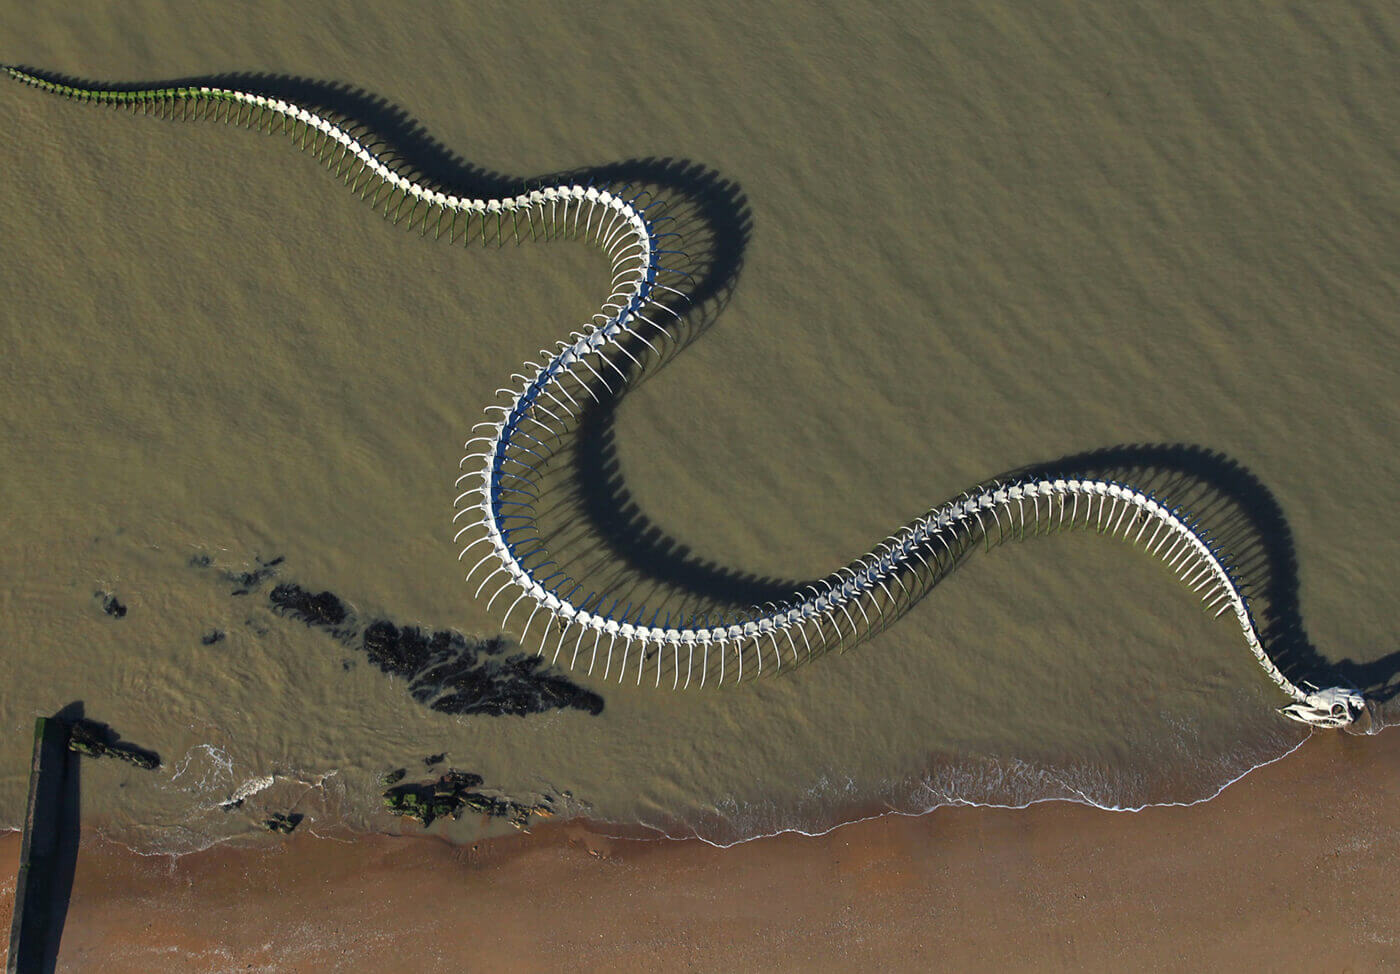 An aerial view of Serpent d'Ocean at the seashore of Nantes, France